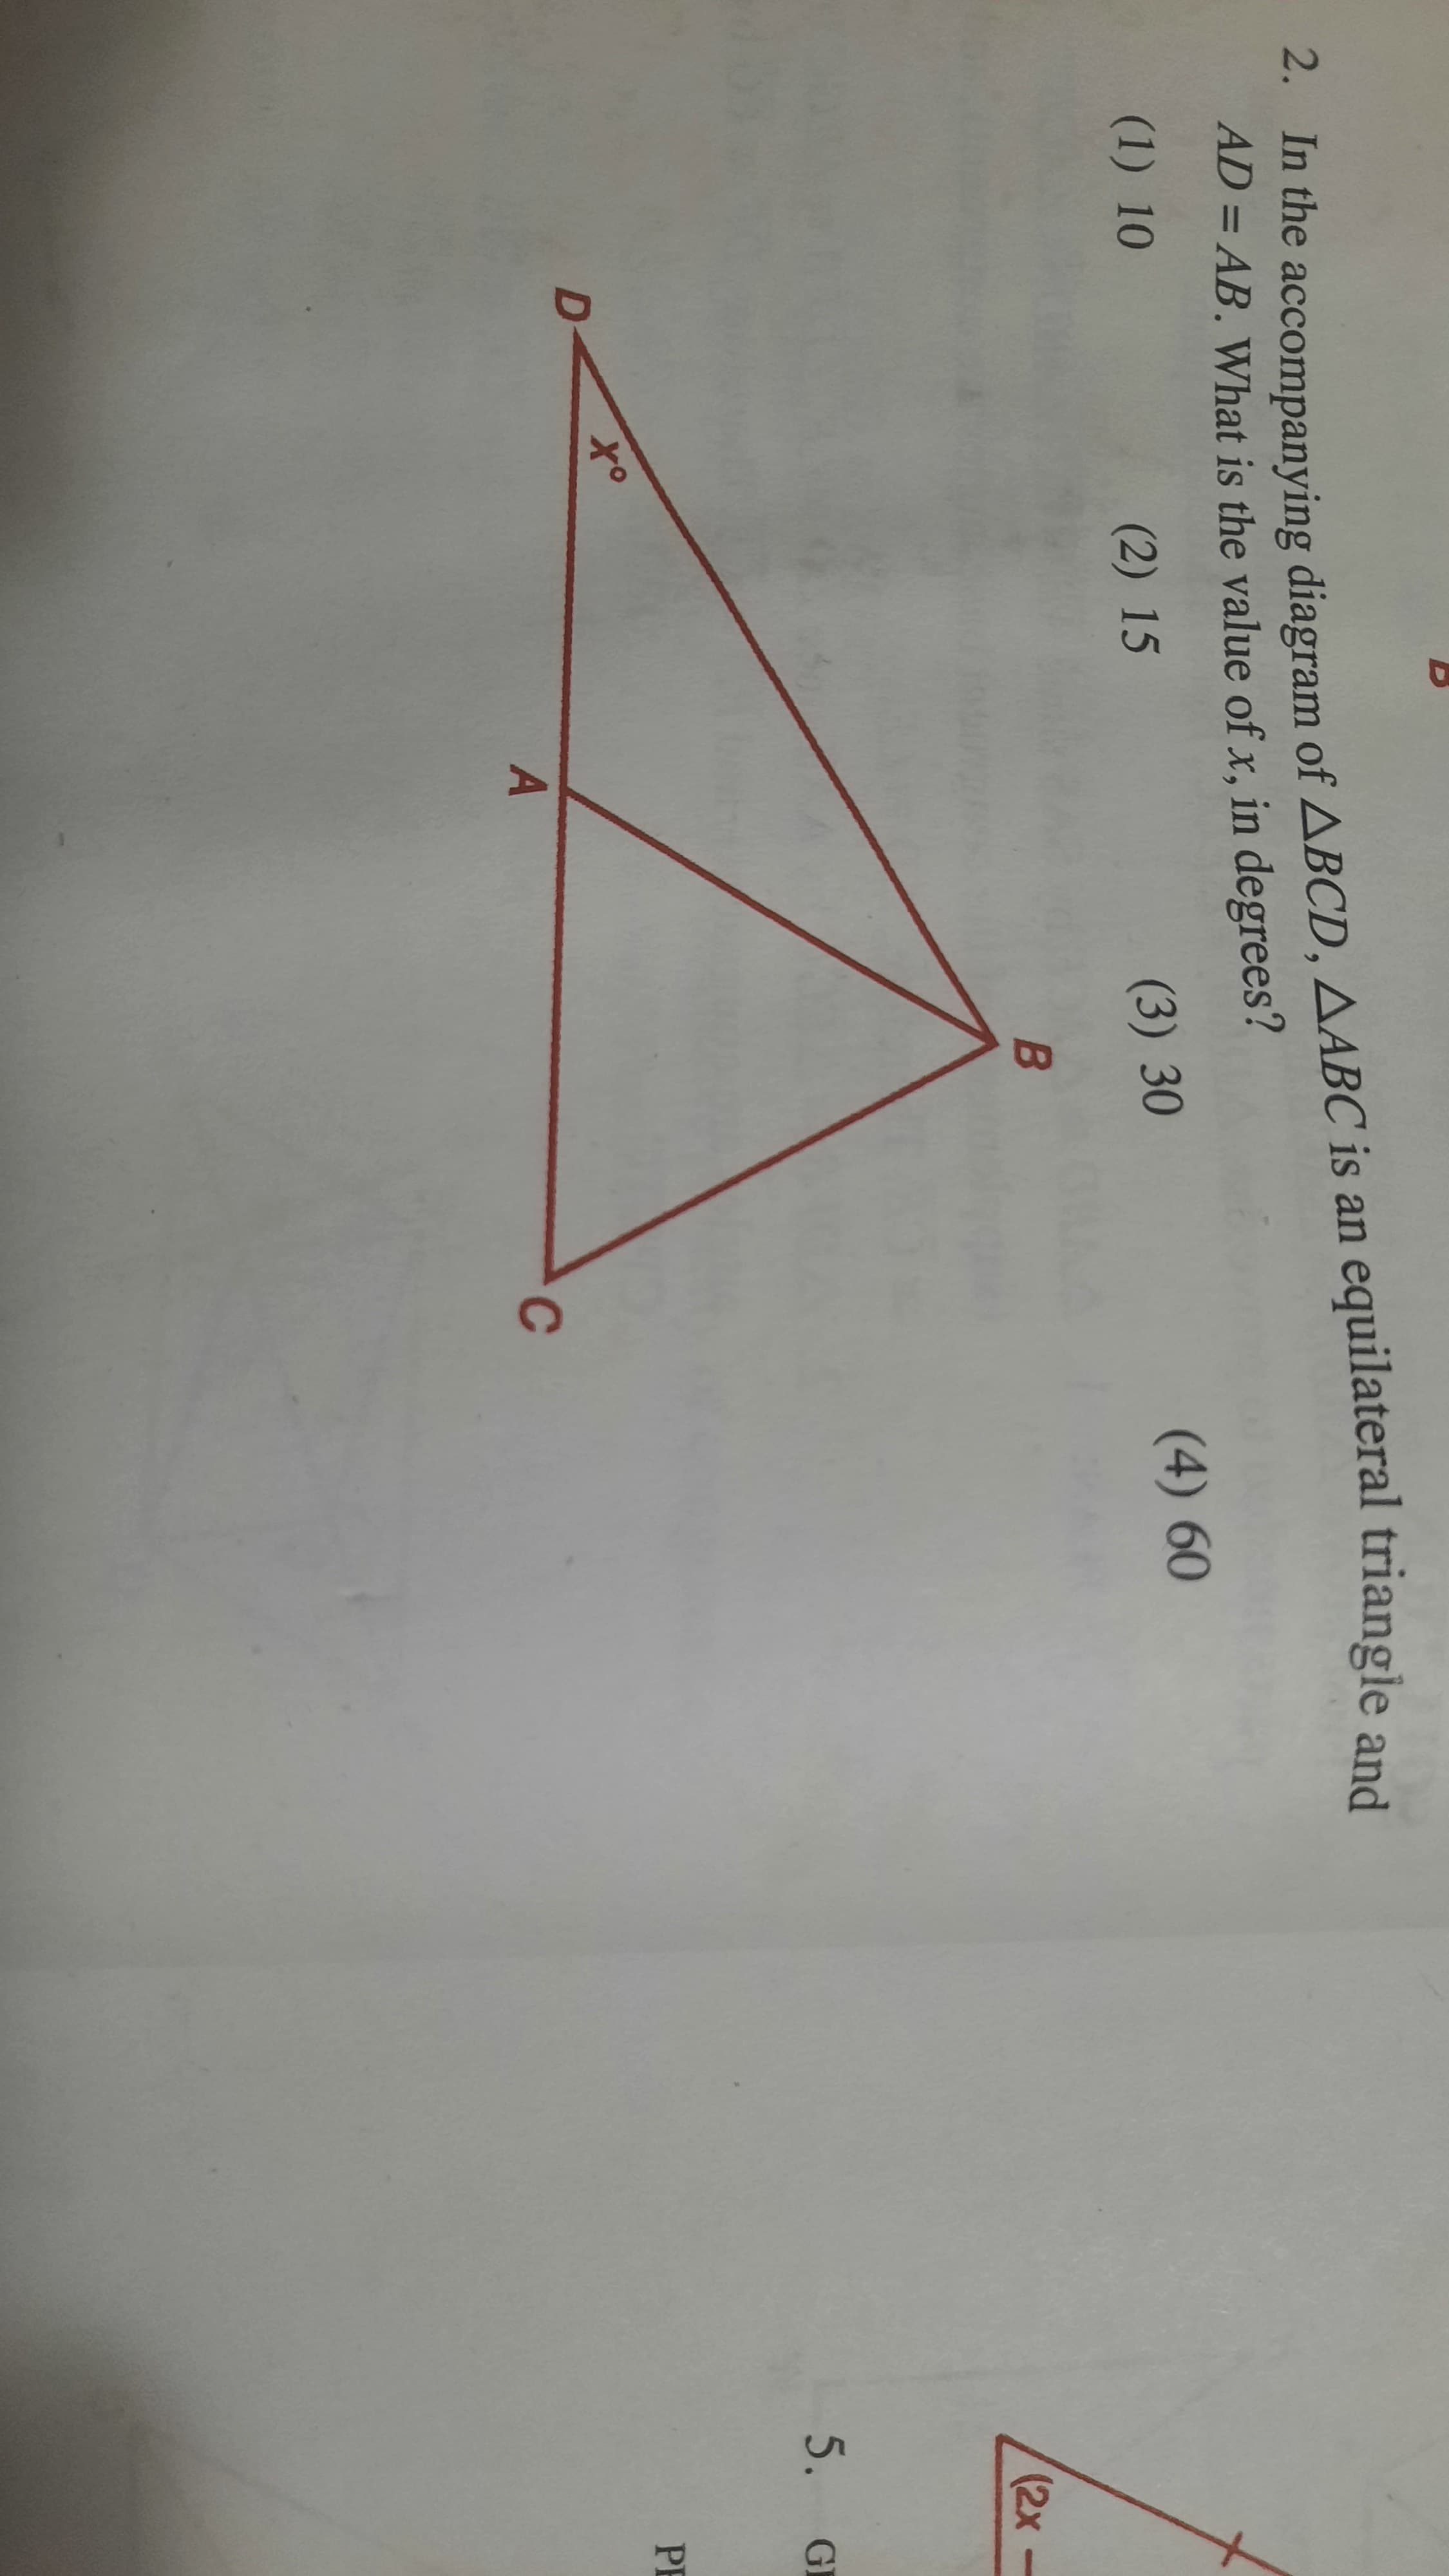 In the accompanying diagram of ABCD, AABC is an equilateral triangle and
AD = AB. What is the value of x, in degrees?
%3D
(1) 10
(2) 15
(3) 30
(4) 60
C
